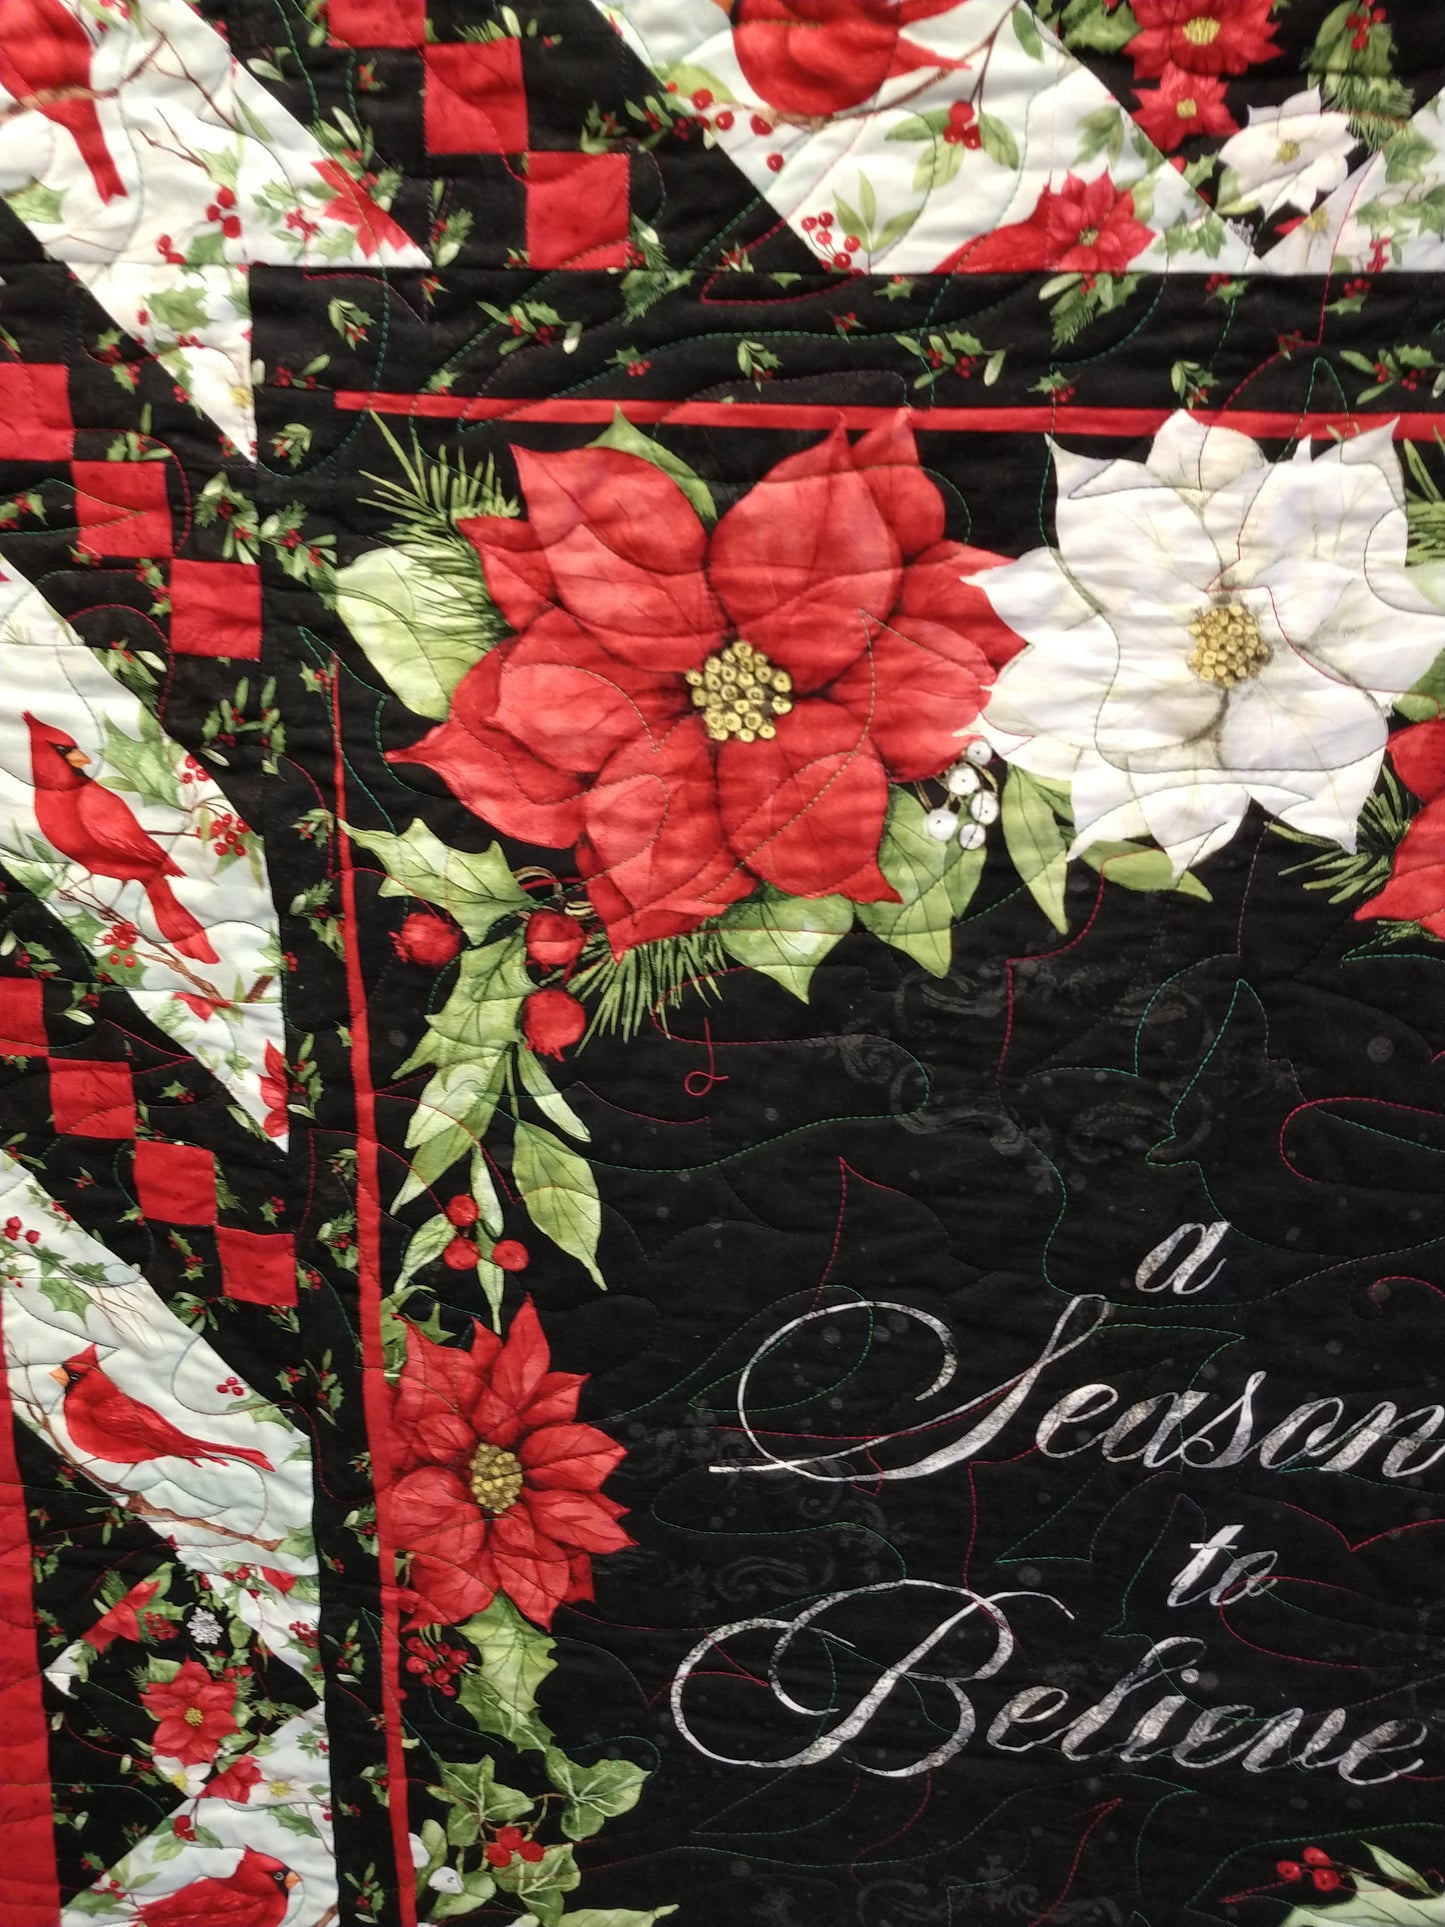 A Season to Believe Holiday Quilt